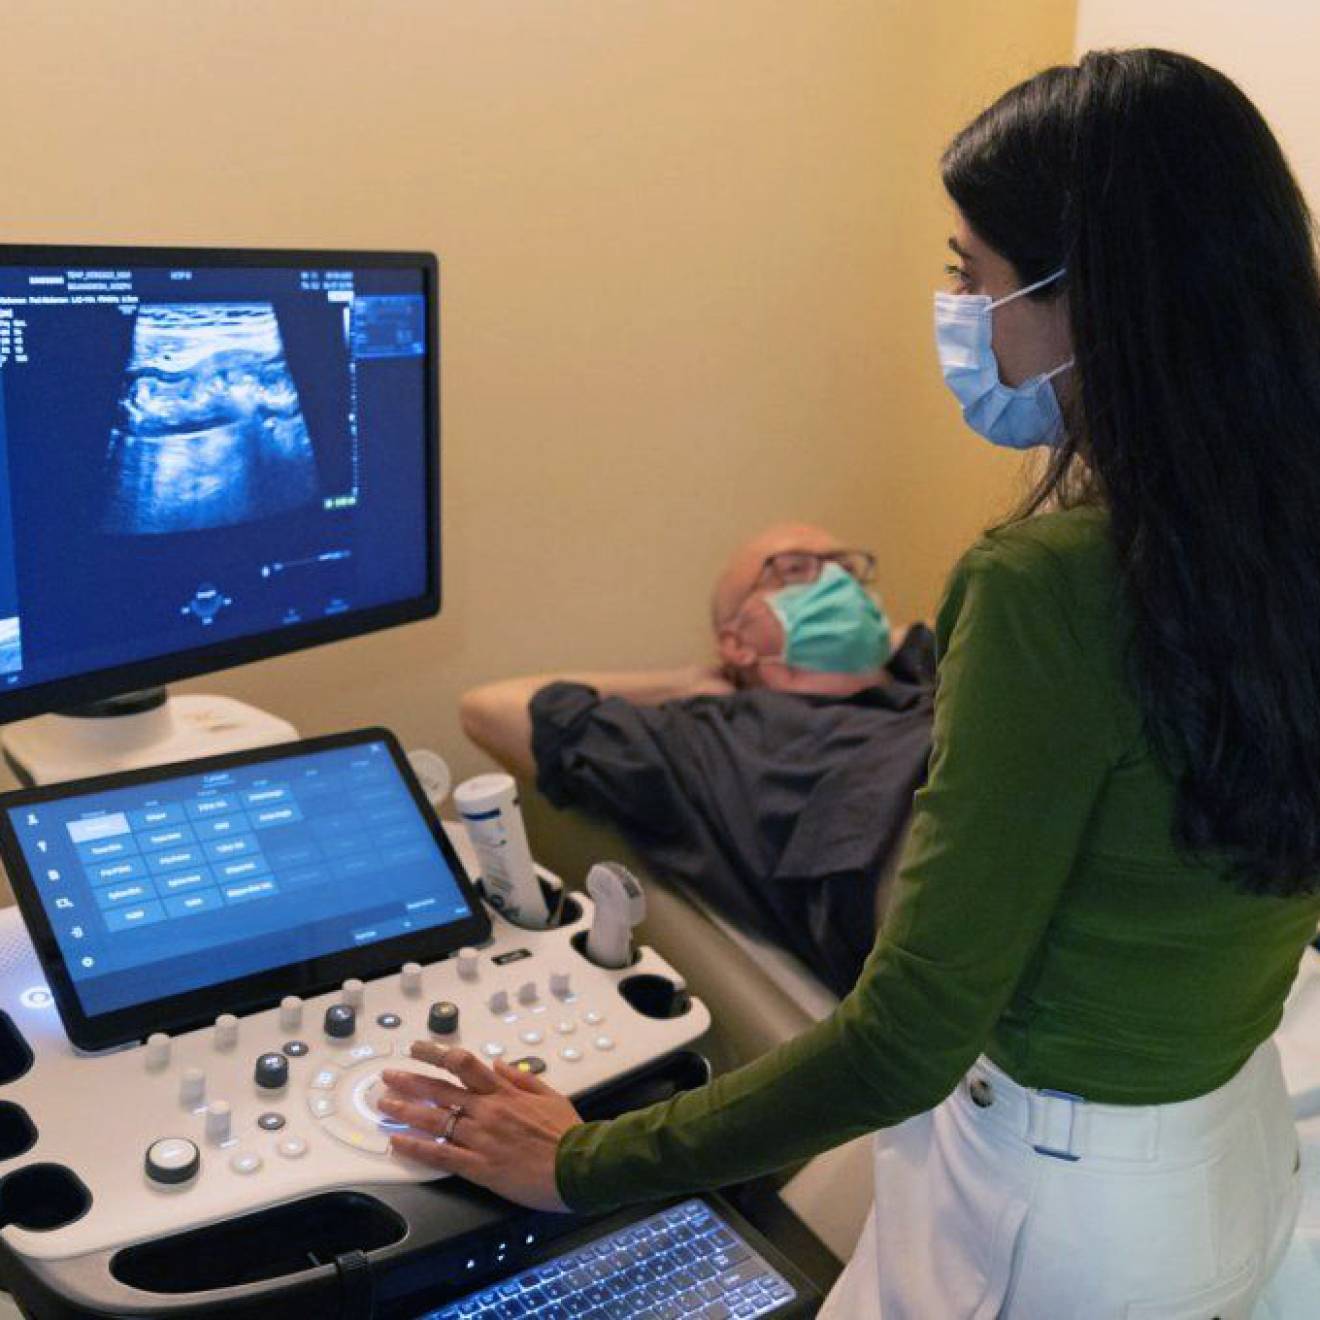 A doctor looking at a patient's ultrasound while the patient reclines nearby